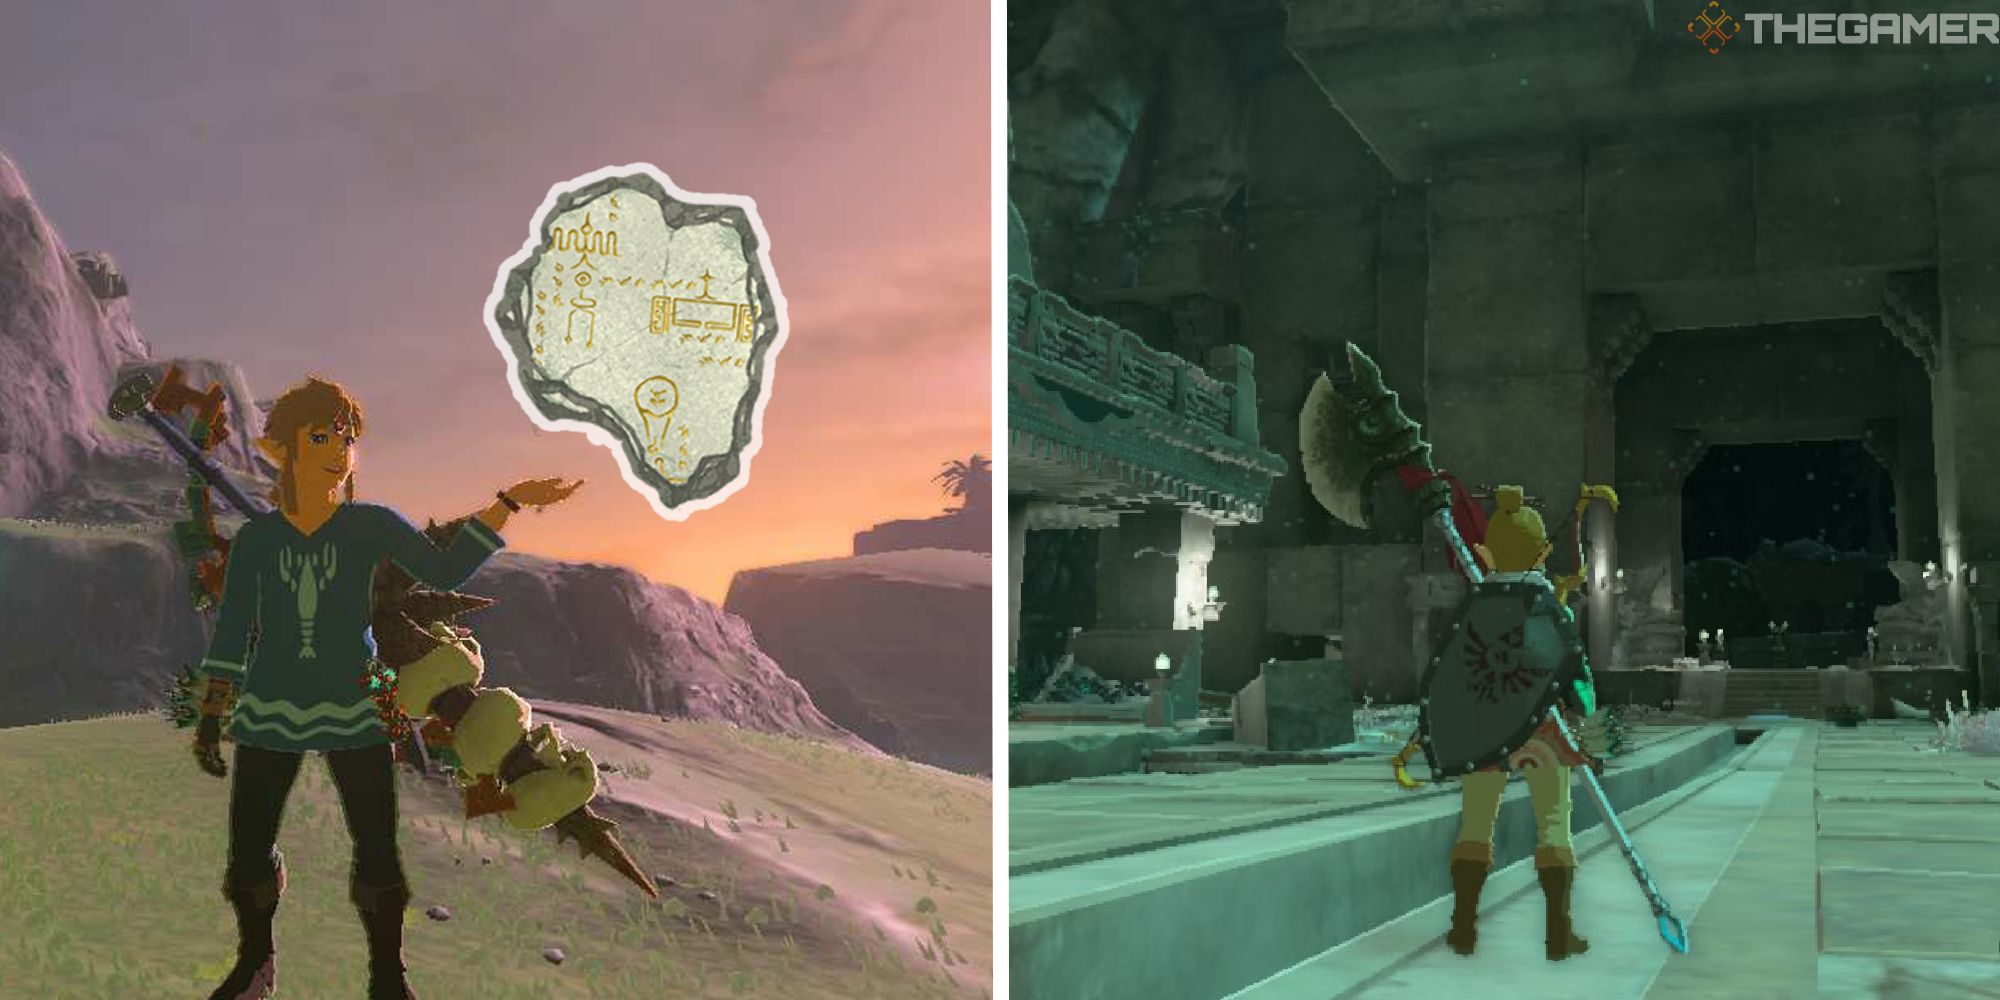 split image showing link holding an edited-in schema stone, next to image of link in great abandoned central mine